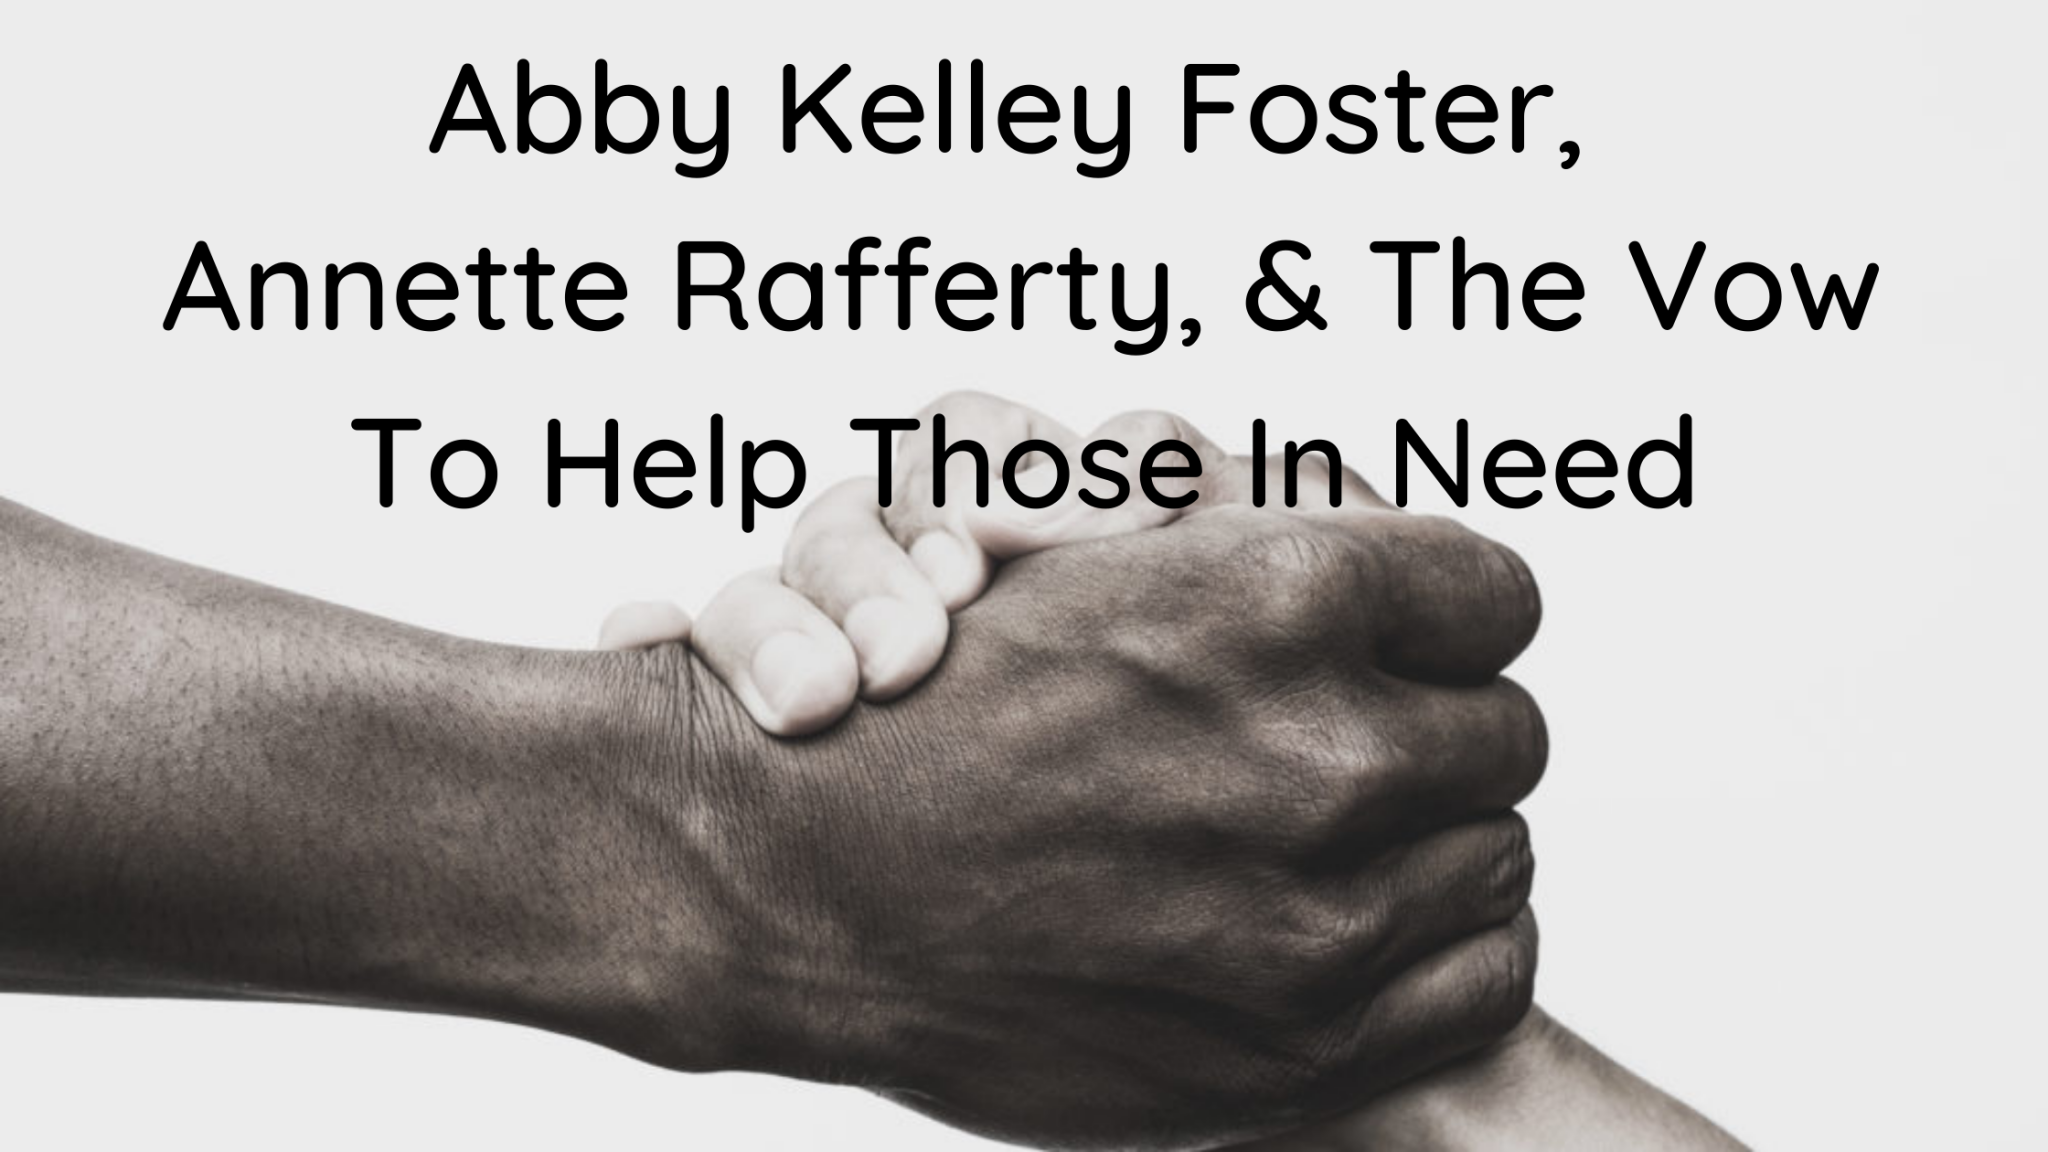 Abby Kelley Foster, Annette Rafferty, & The Vow To Help Those In Need -  Abby's House